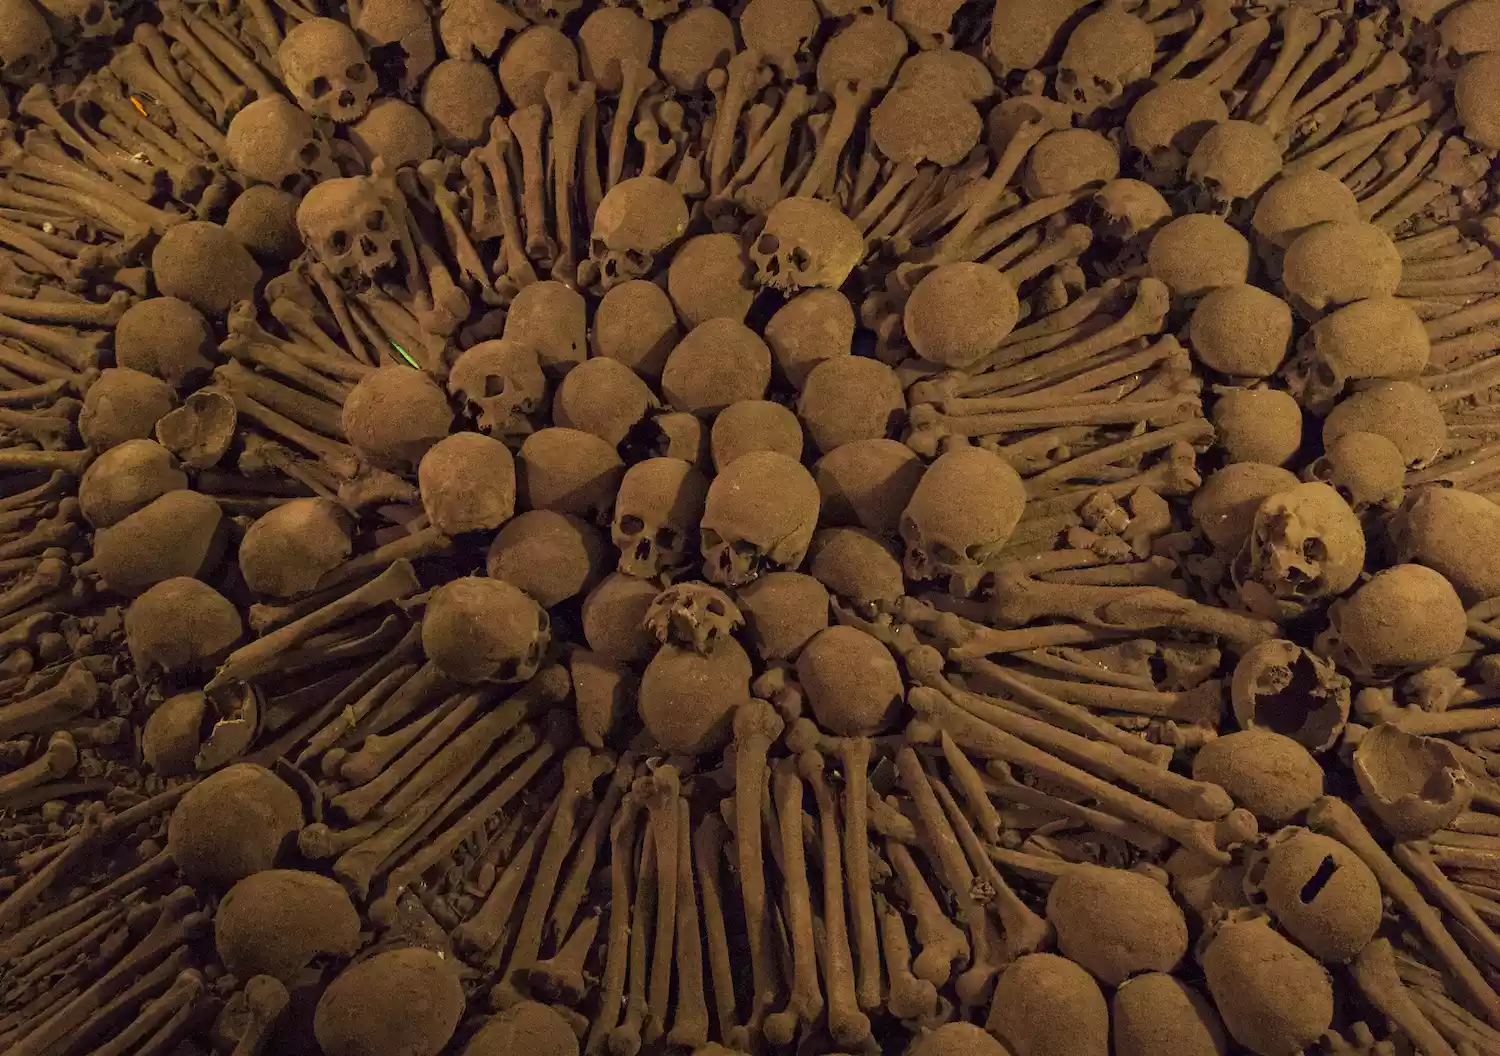 Bones and skulls laid out in an intricate design at Catacombs of Lima at the Monastery of San Francisco